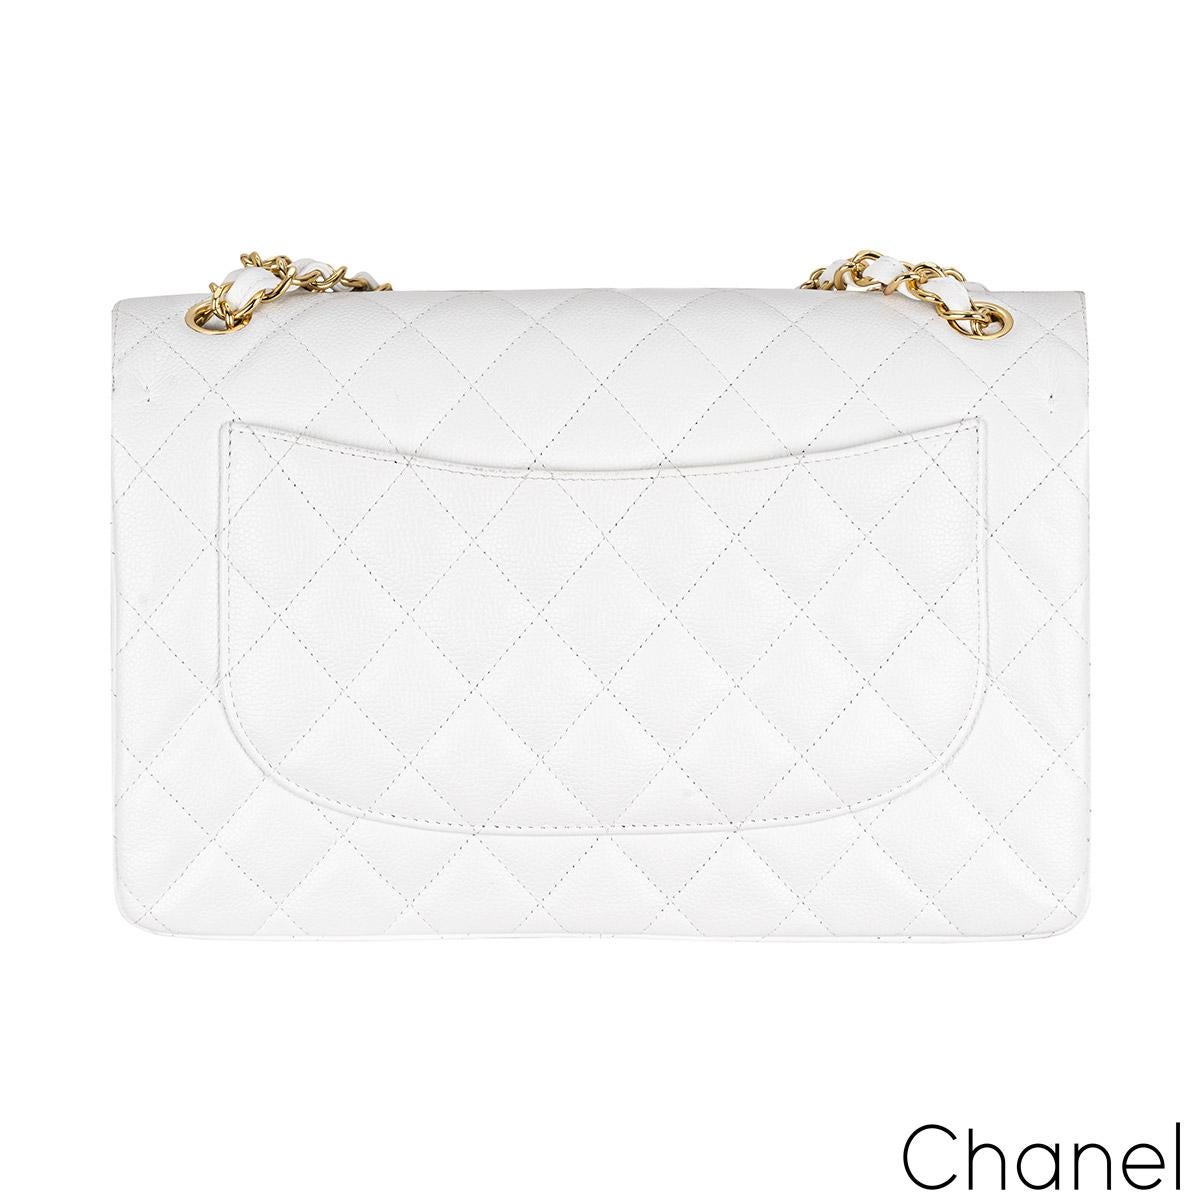 A gorgeous Chanel Jumbo Classic Double Flap Handbag. The exterior of this jumbo classic is in white caviar quilted leather with gold-tone hardware. It features a front flap with signature CC turnlock closure, half moon back pocket, and an adjustable